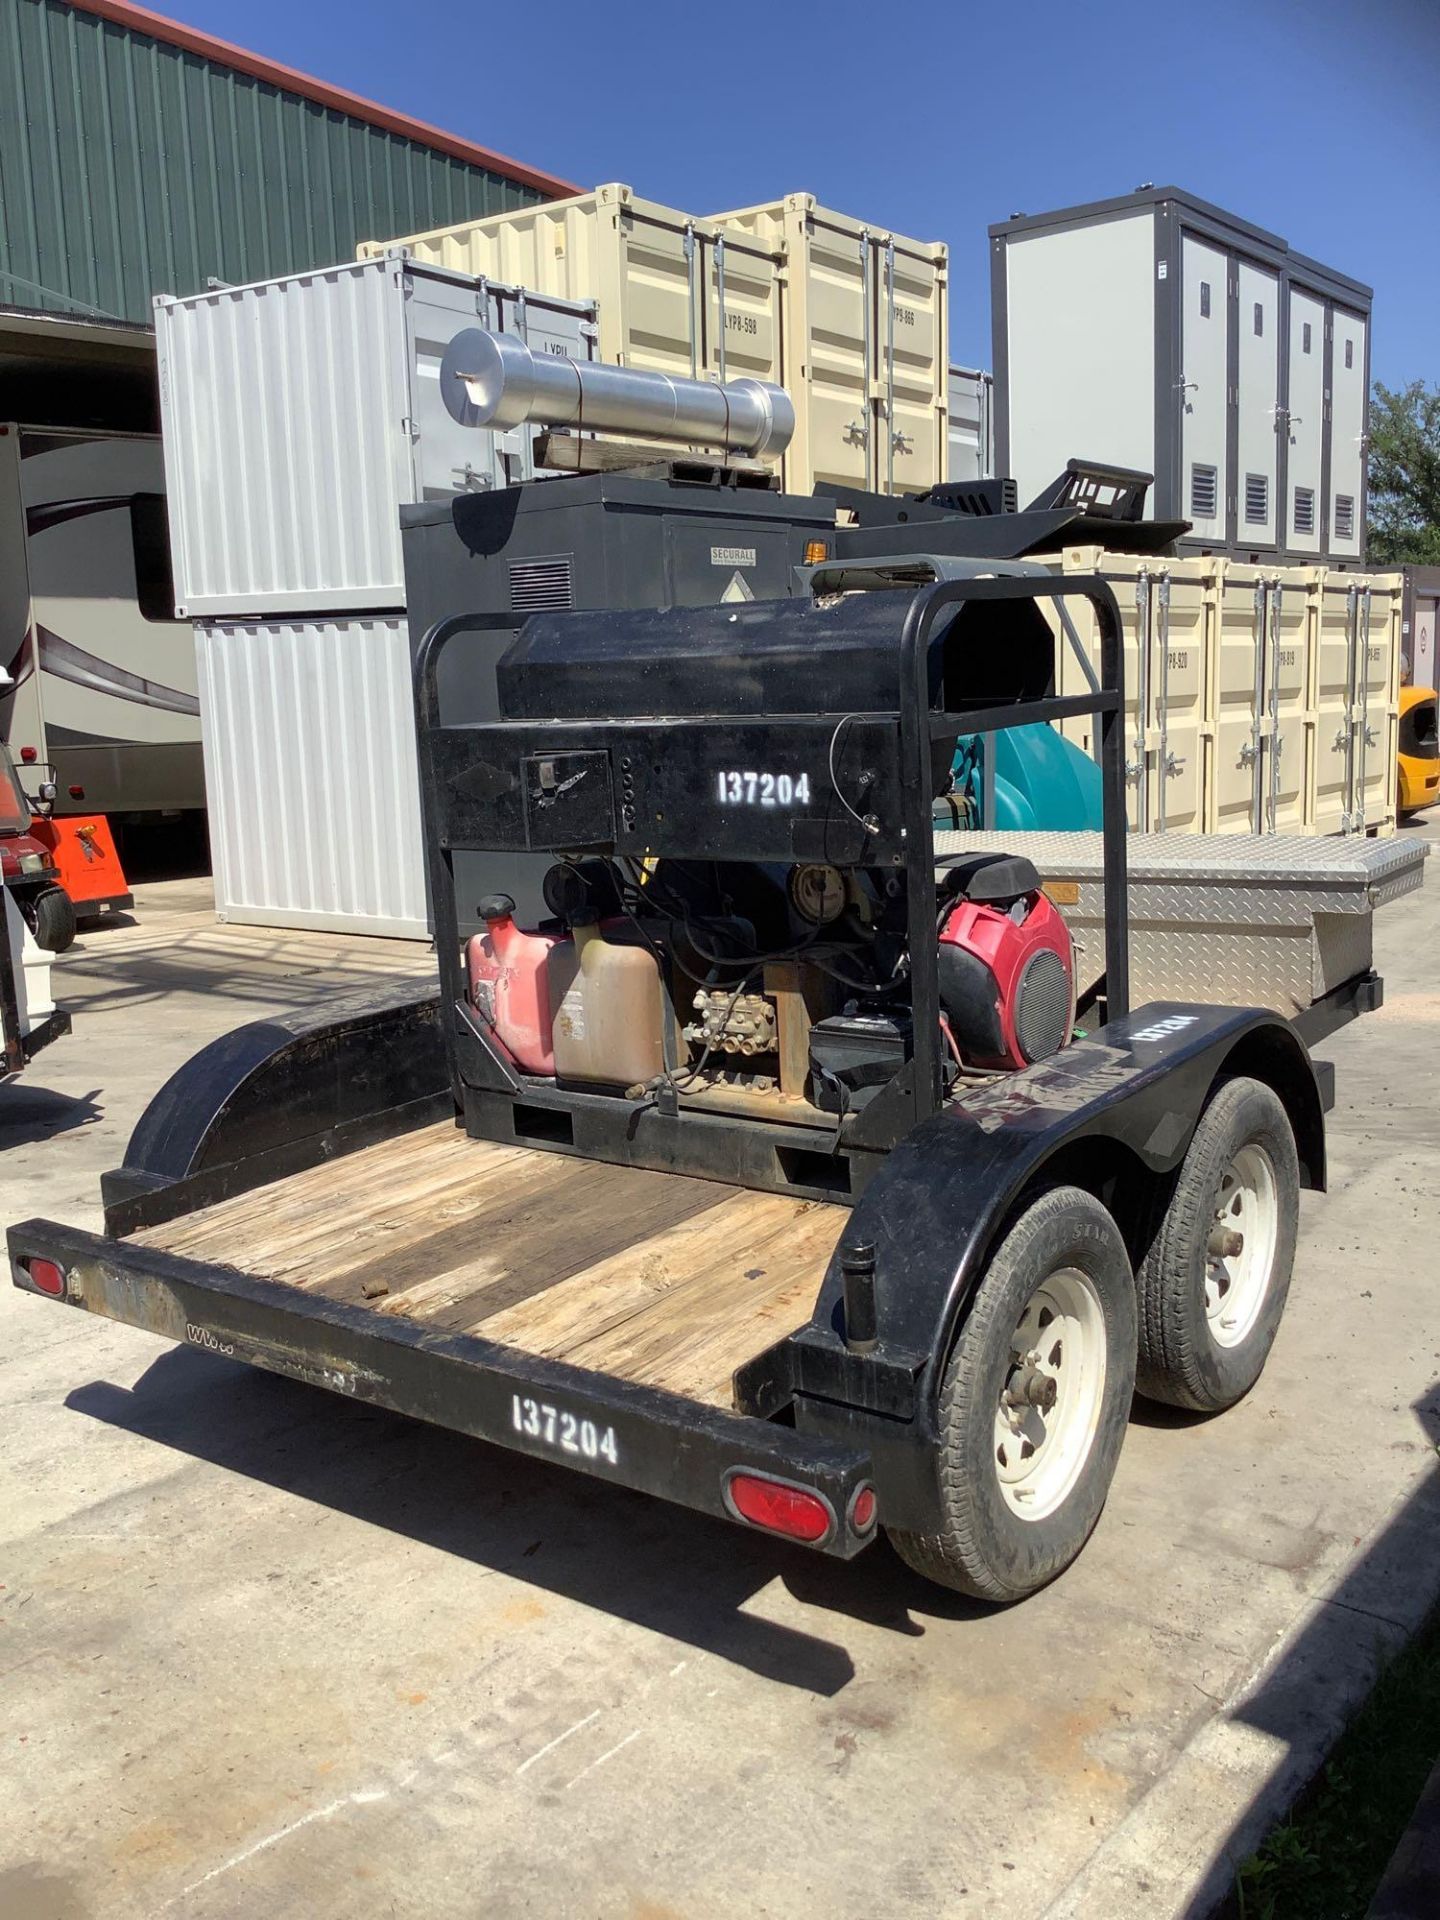 TRAILER MOUNTED HEATED PRESSURE WASHER SYSTEM, DUAL AXLE TRAILER, STORAGE BOX, BILL OF SALE ONLY, RU - Image 9 of 17